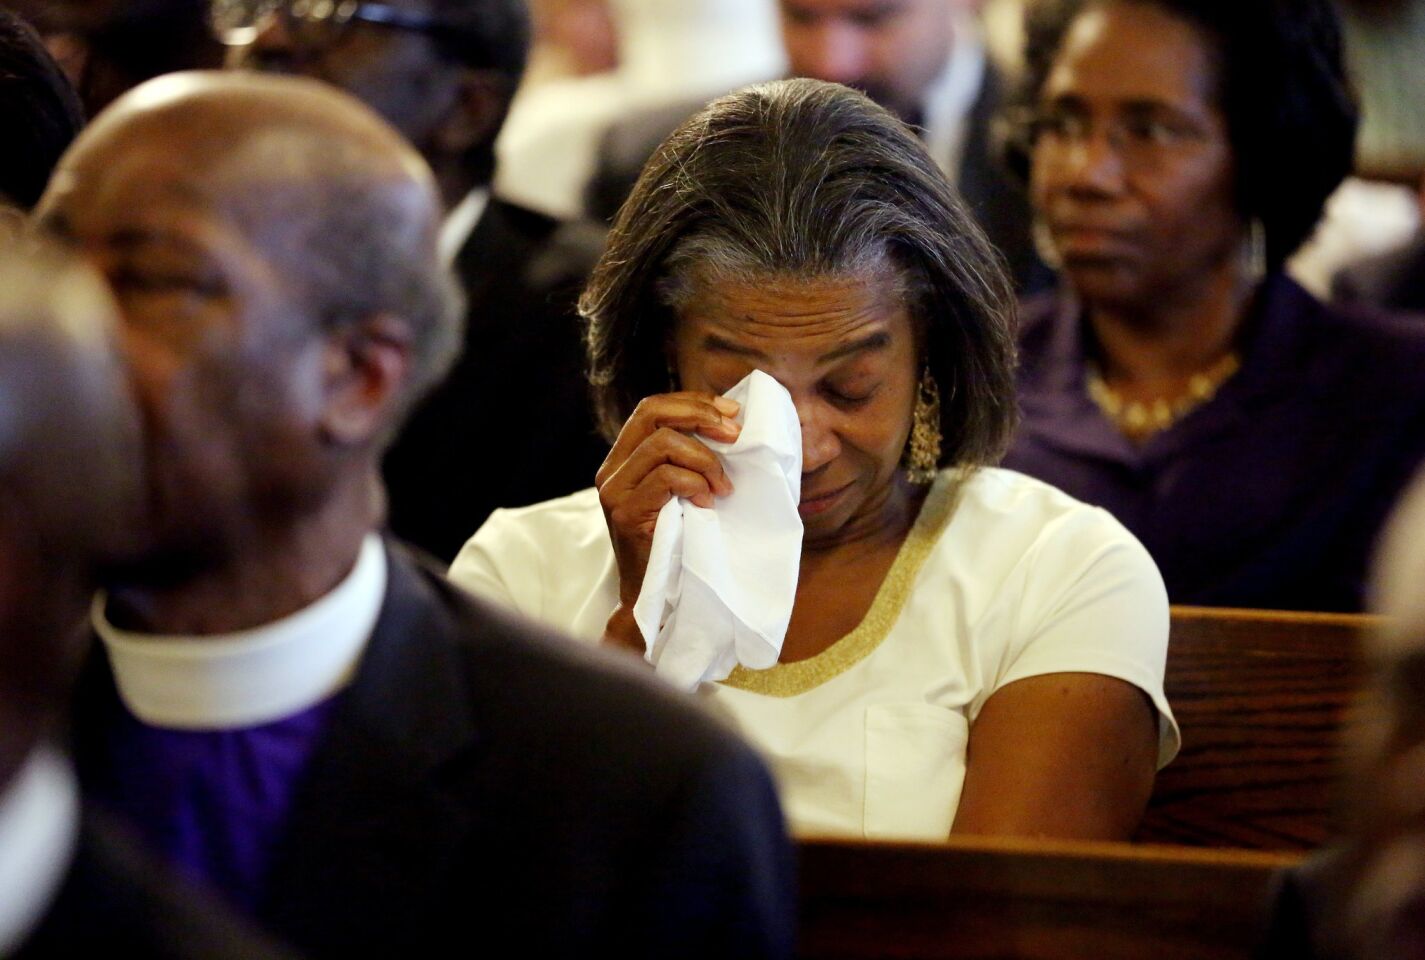 Marie Goff wipes away tears during a prayer vigil at Morris Brown AME Church in Charleston, S.C., on Thursday for the victims of the previous day's shooting at the city's Emanuel AME Church.